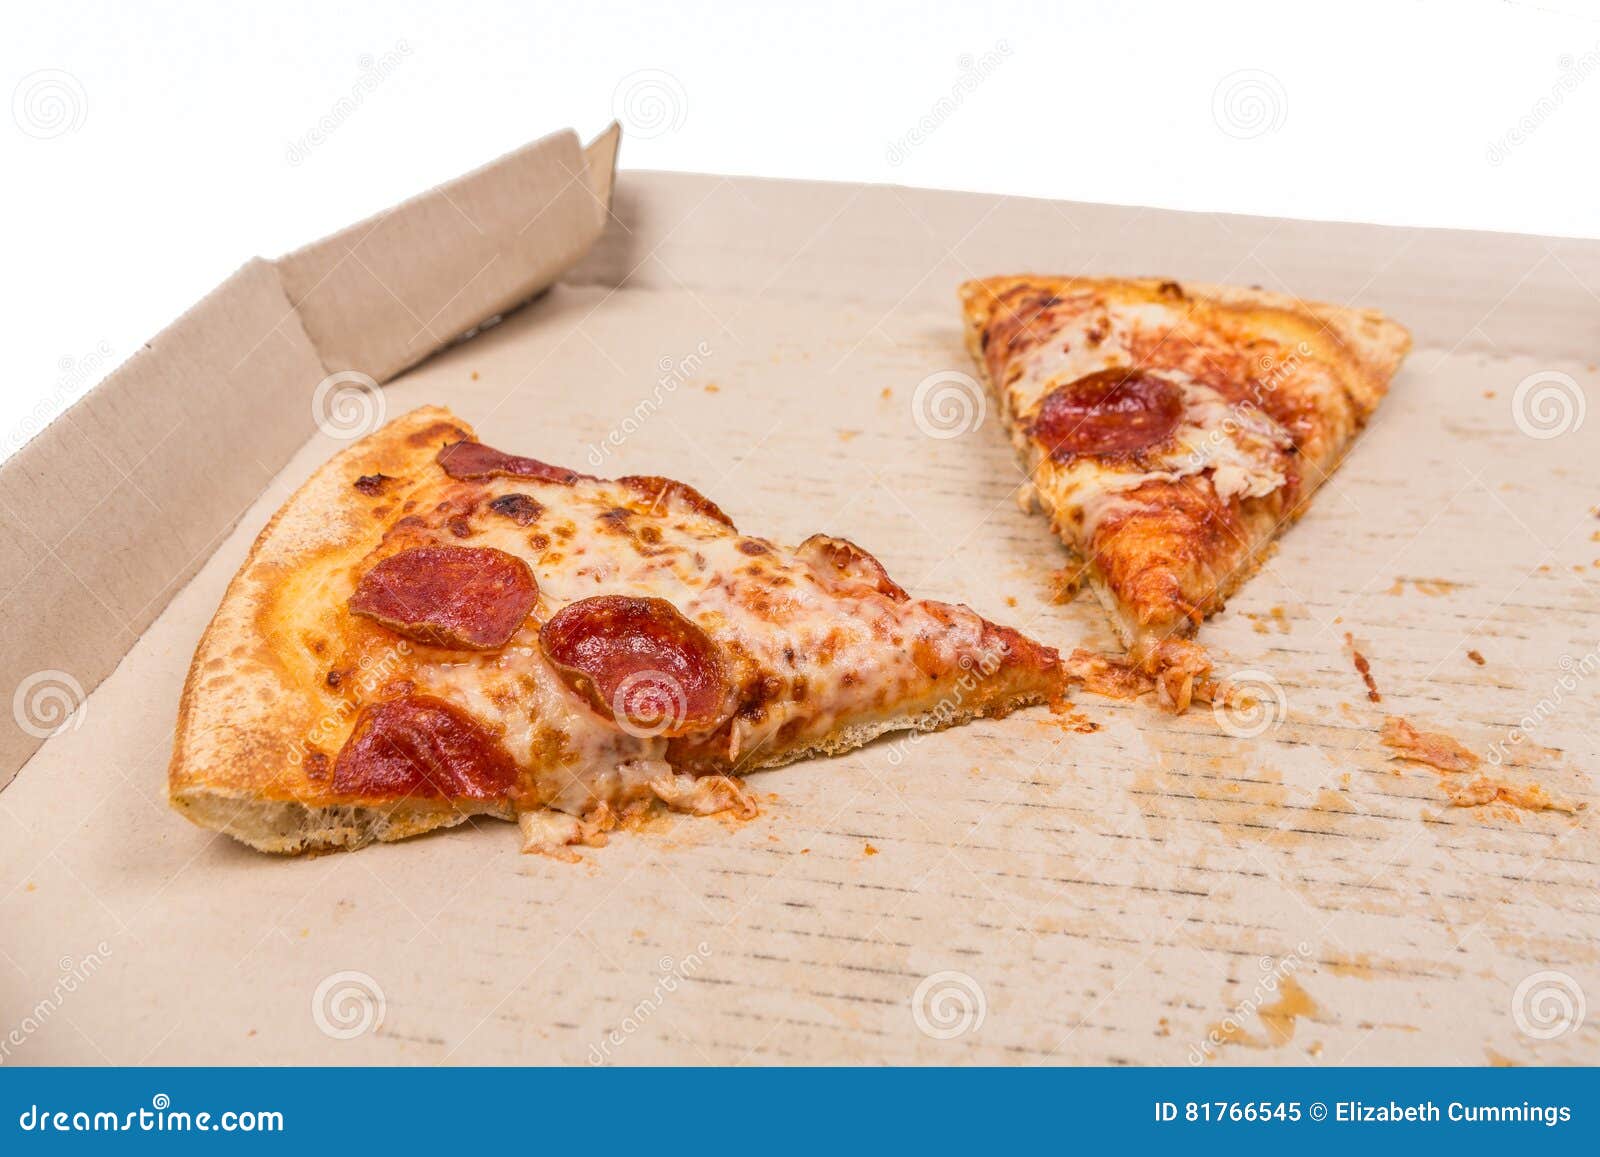 https://thumbs.dreamstime.com/z/leftover-pizza-box-isolated-white-background-81766545.jpg